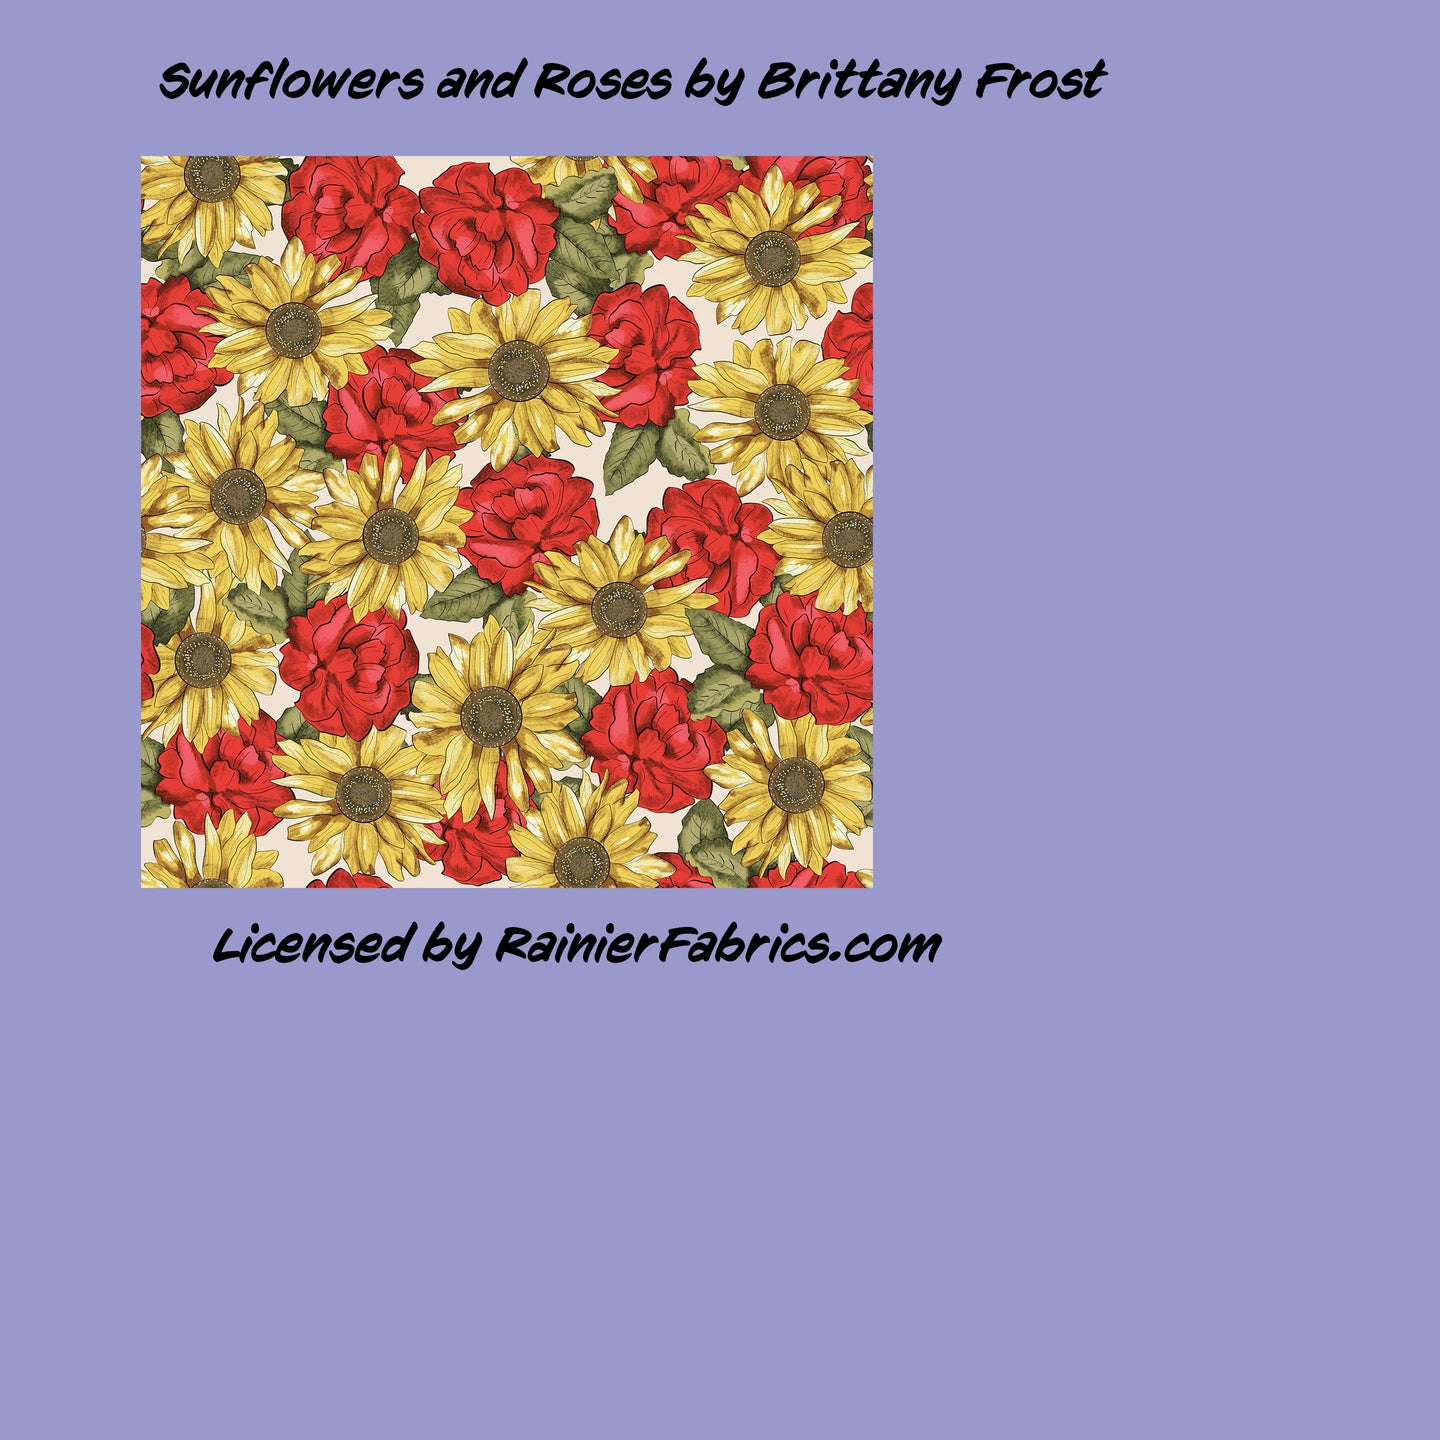 Sunflowers and Roses by Brittany Frost  - 2-5 day turnaround - Order by 1/2 yard; Description of bases below